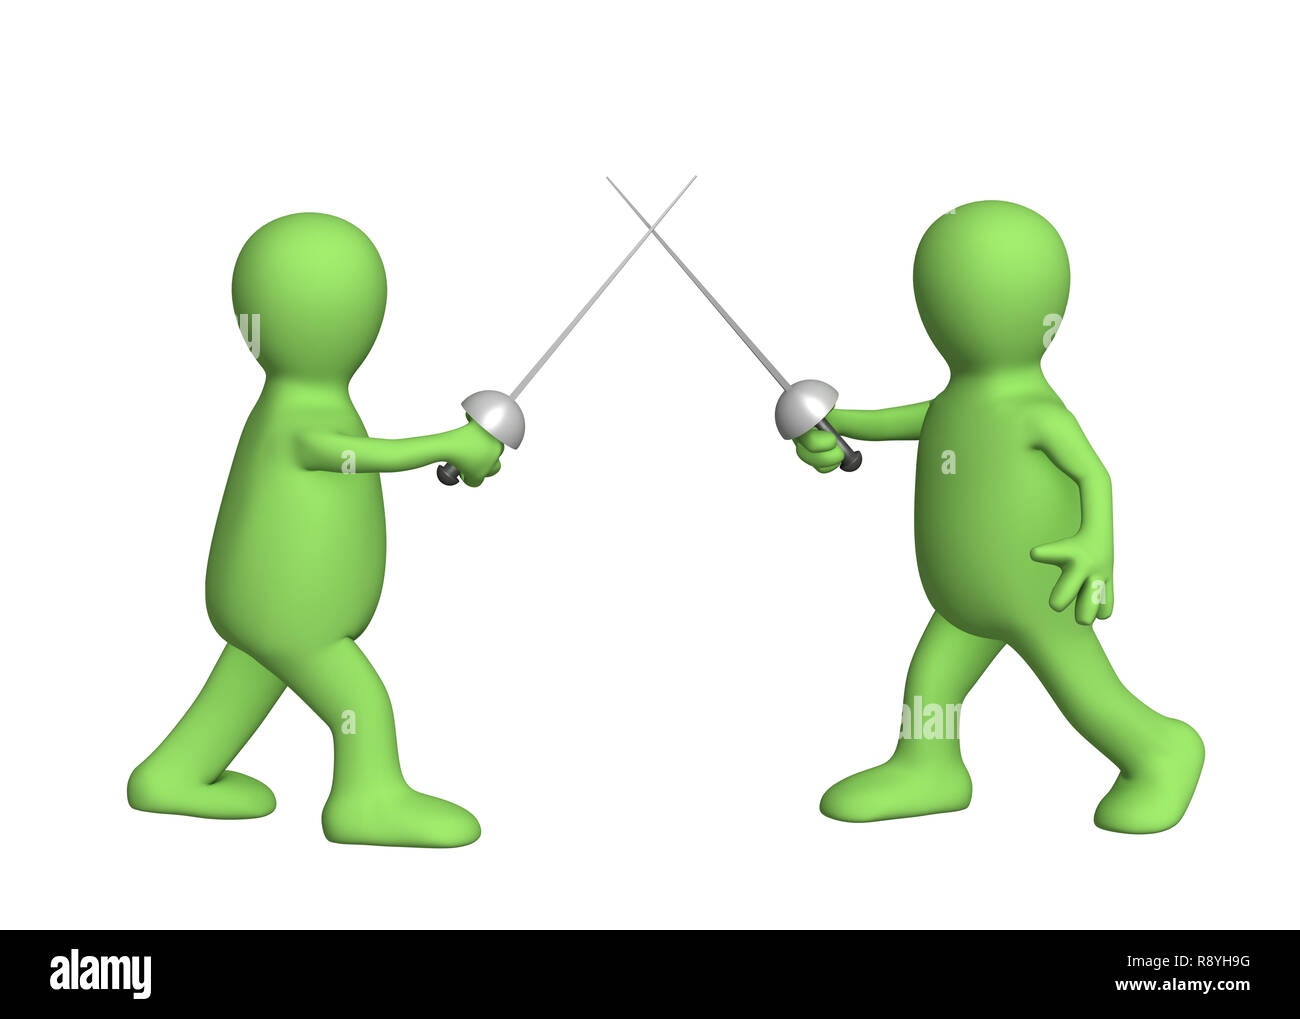 https://c8.alamy.com/comp/R8YH9G/two-3d-persons-puppets-fencing-swords-objects-over-white-R8YH9G.jpg